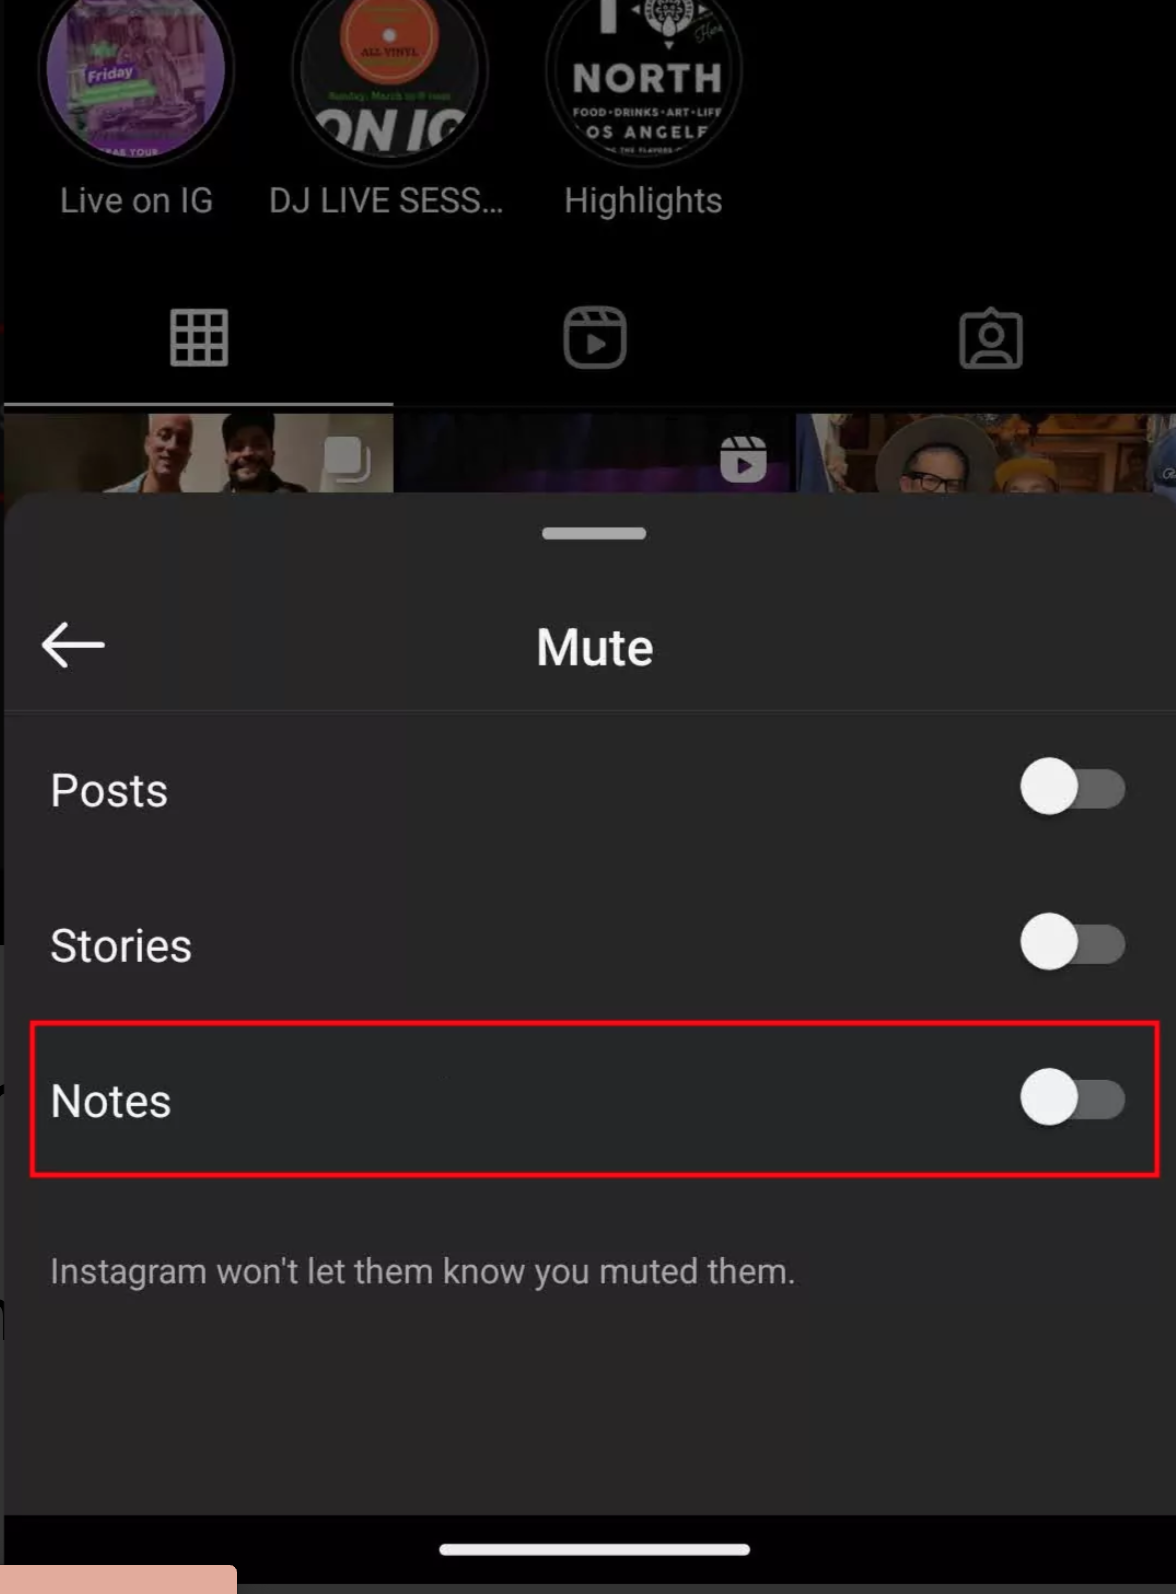 Toggle Notes to Unmute